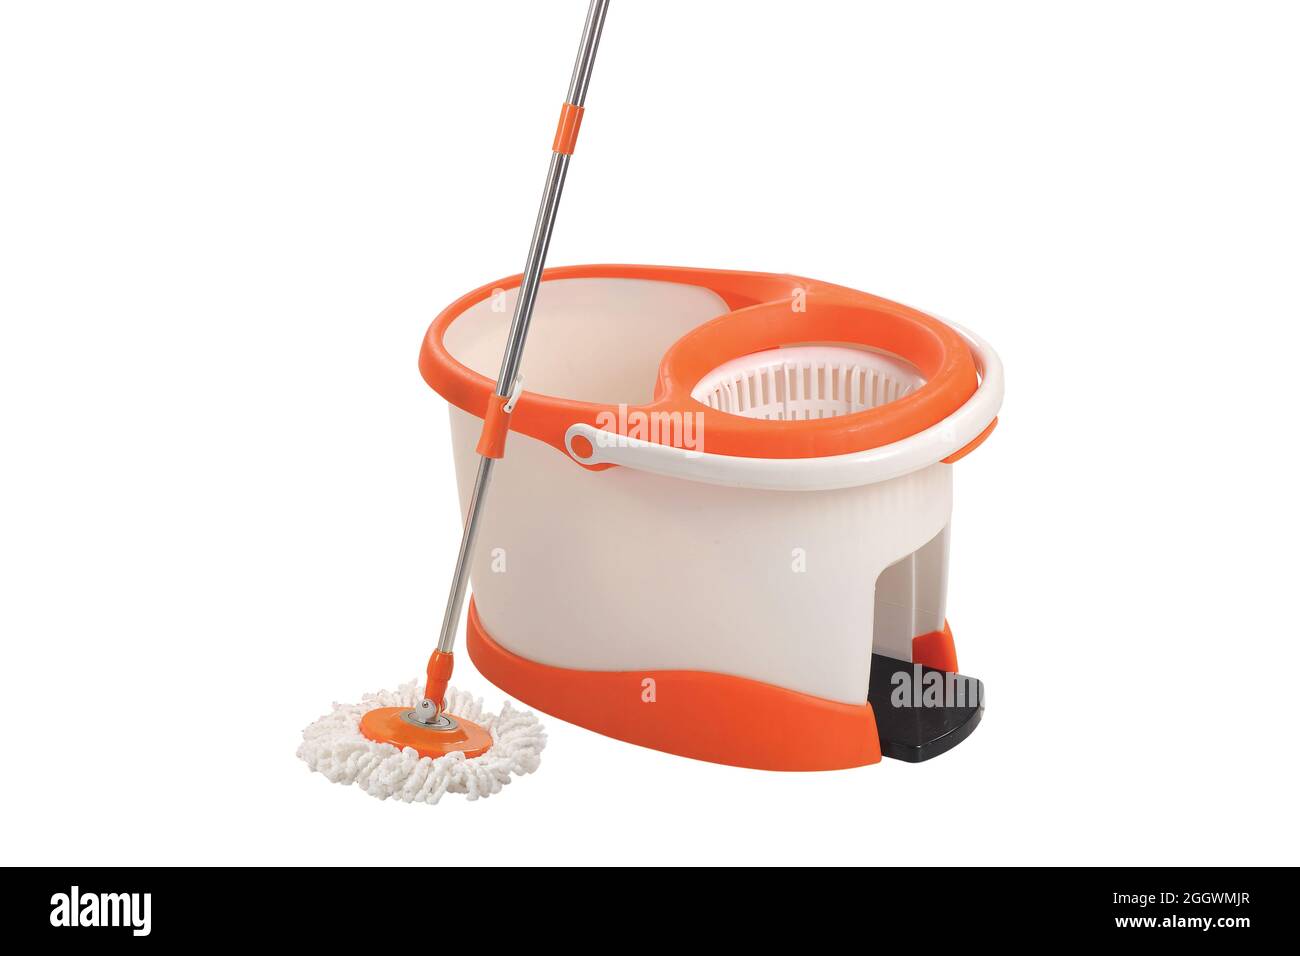 https://c8.alamy.com/comp/2GGWMJR/realistic-mop-sponge-and-bucket-full-of-soapy-foam-with-colorful-bubbles-floor-mopping-concept-for-housework-design-2GGWMJR.jpg